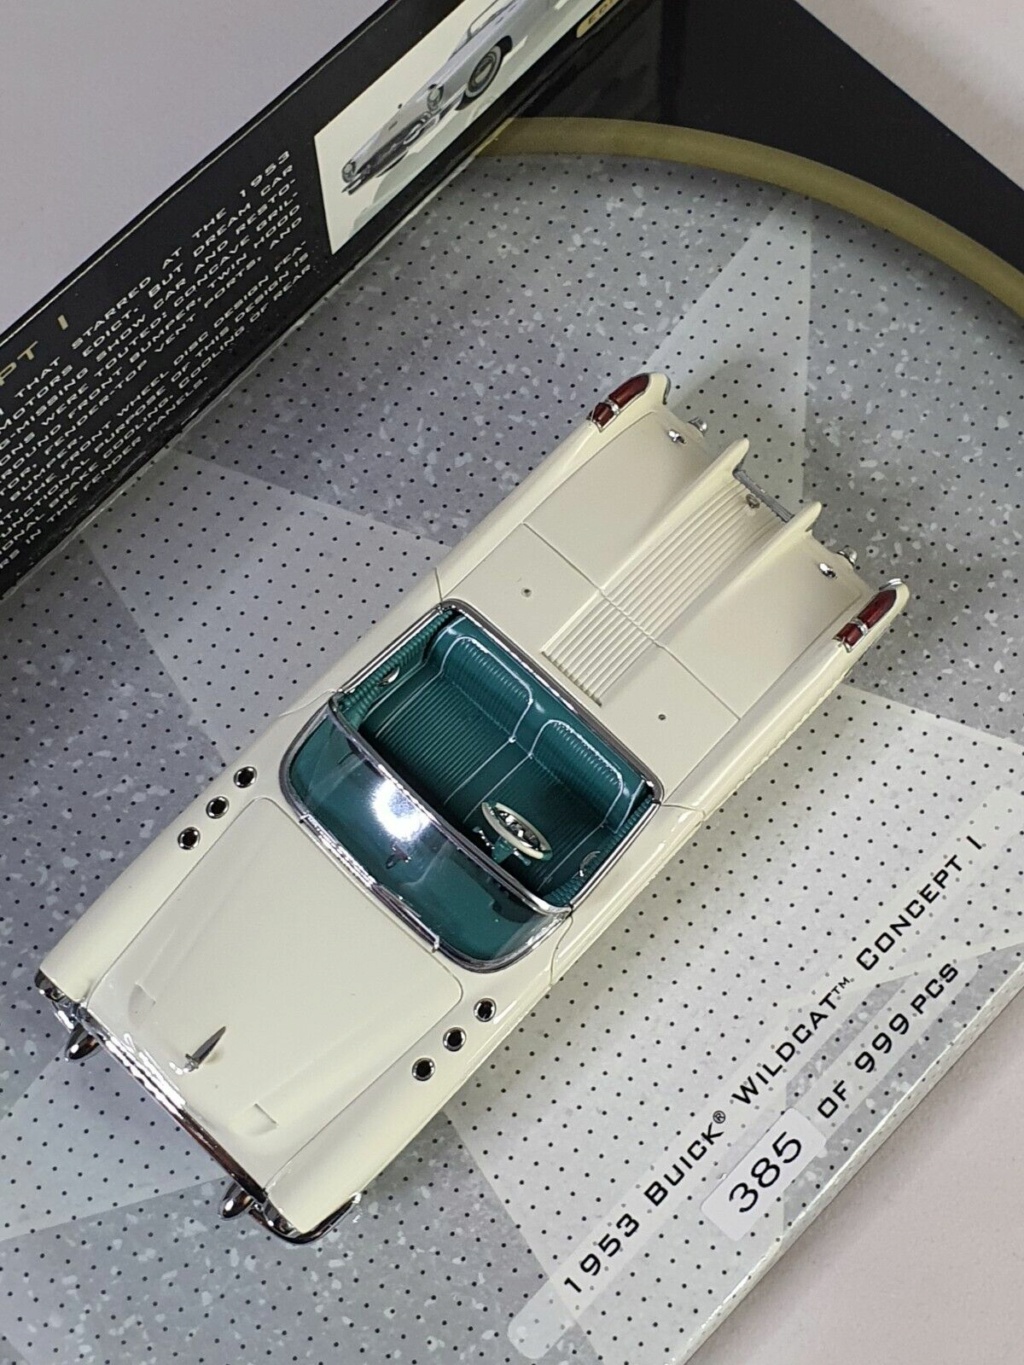 Minichamps Dream cars to the 1950's - concept car to the Motorama and other - 1/43 scale and 1/18 scale S-l16319